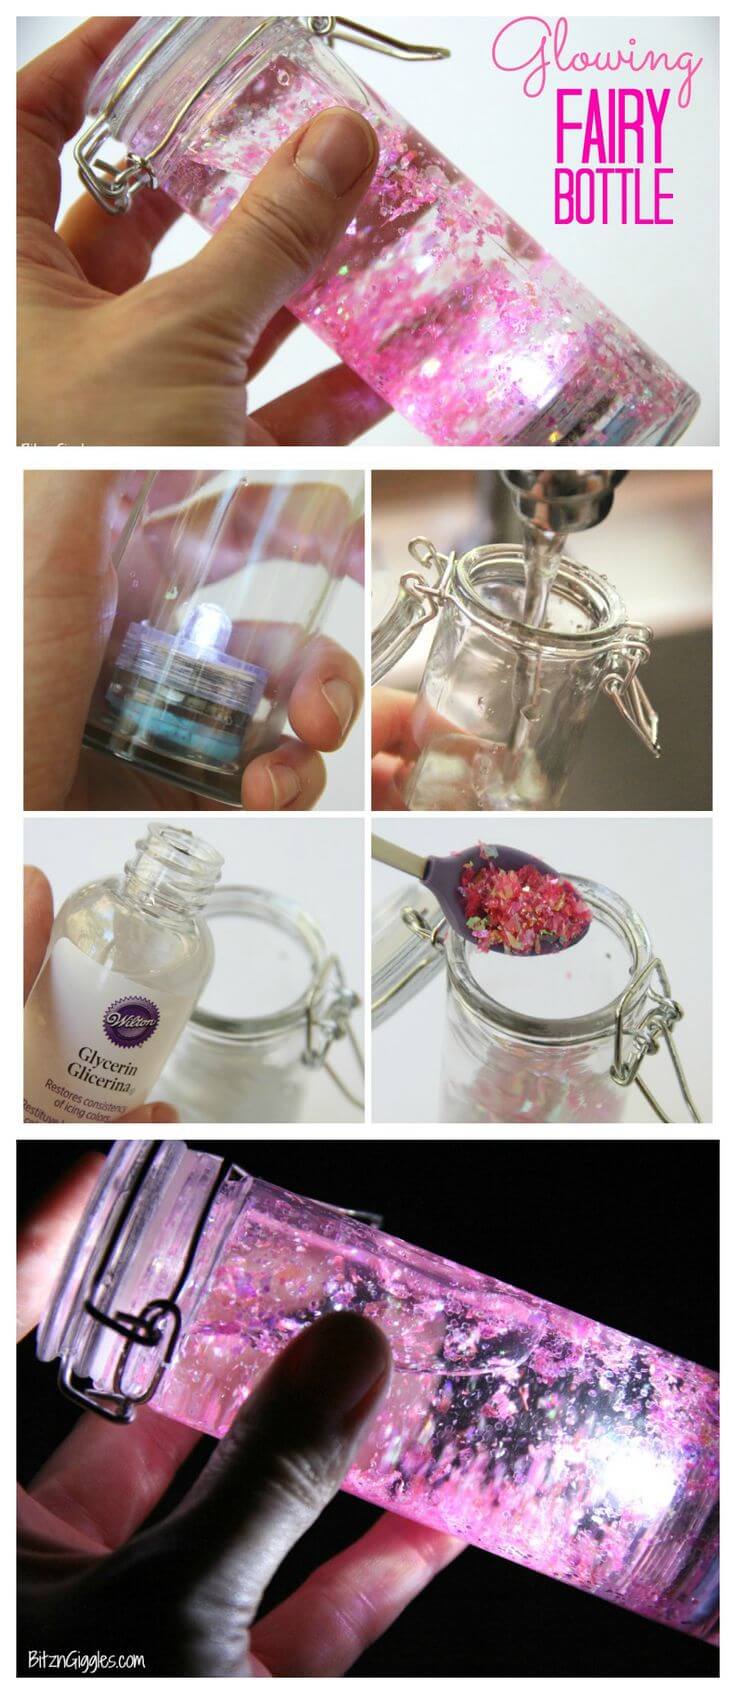 Little Ones Love to Make Glowing Fairy Bottles